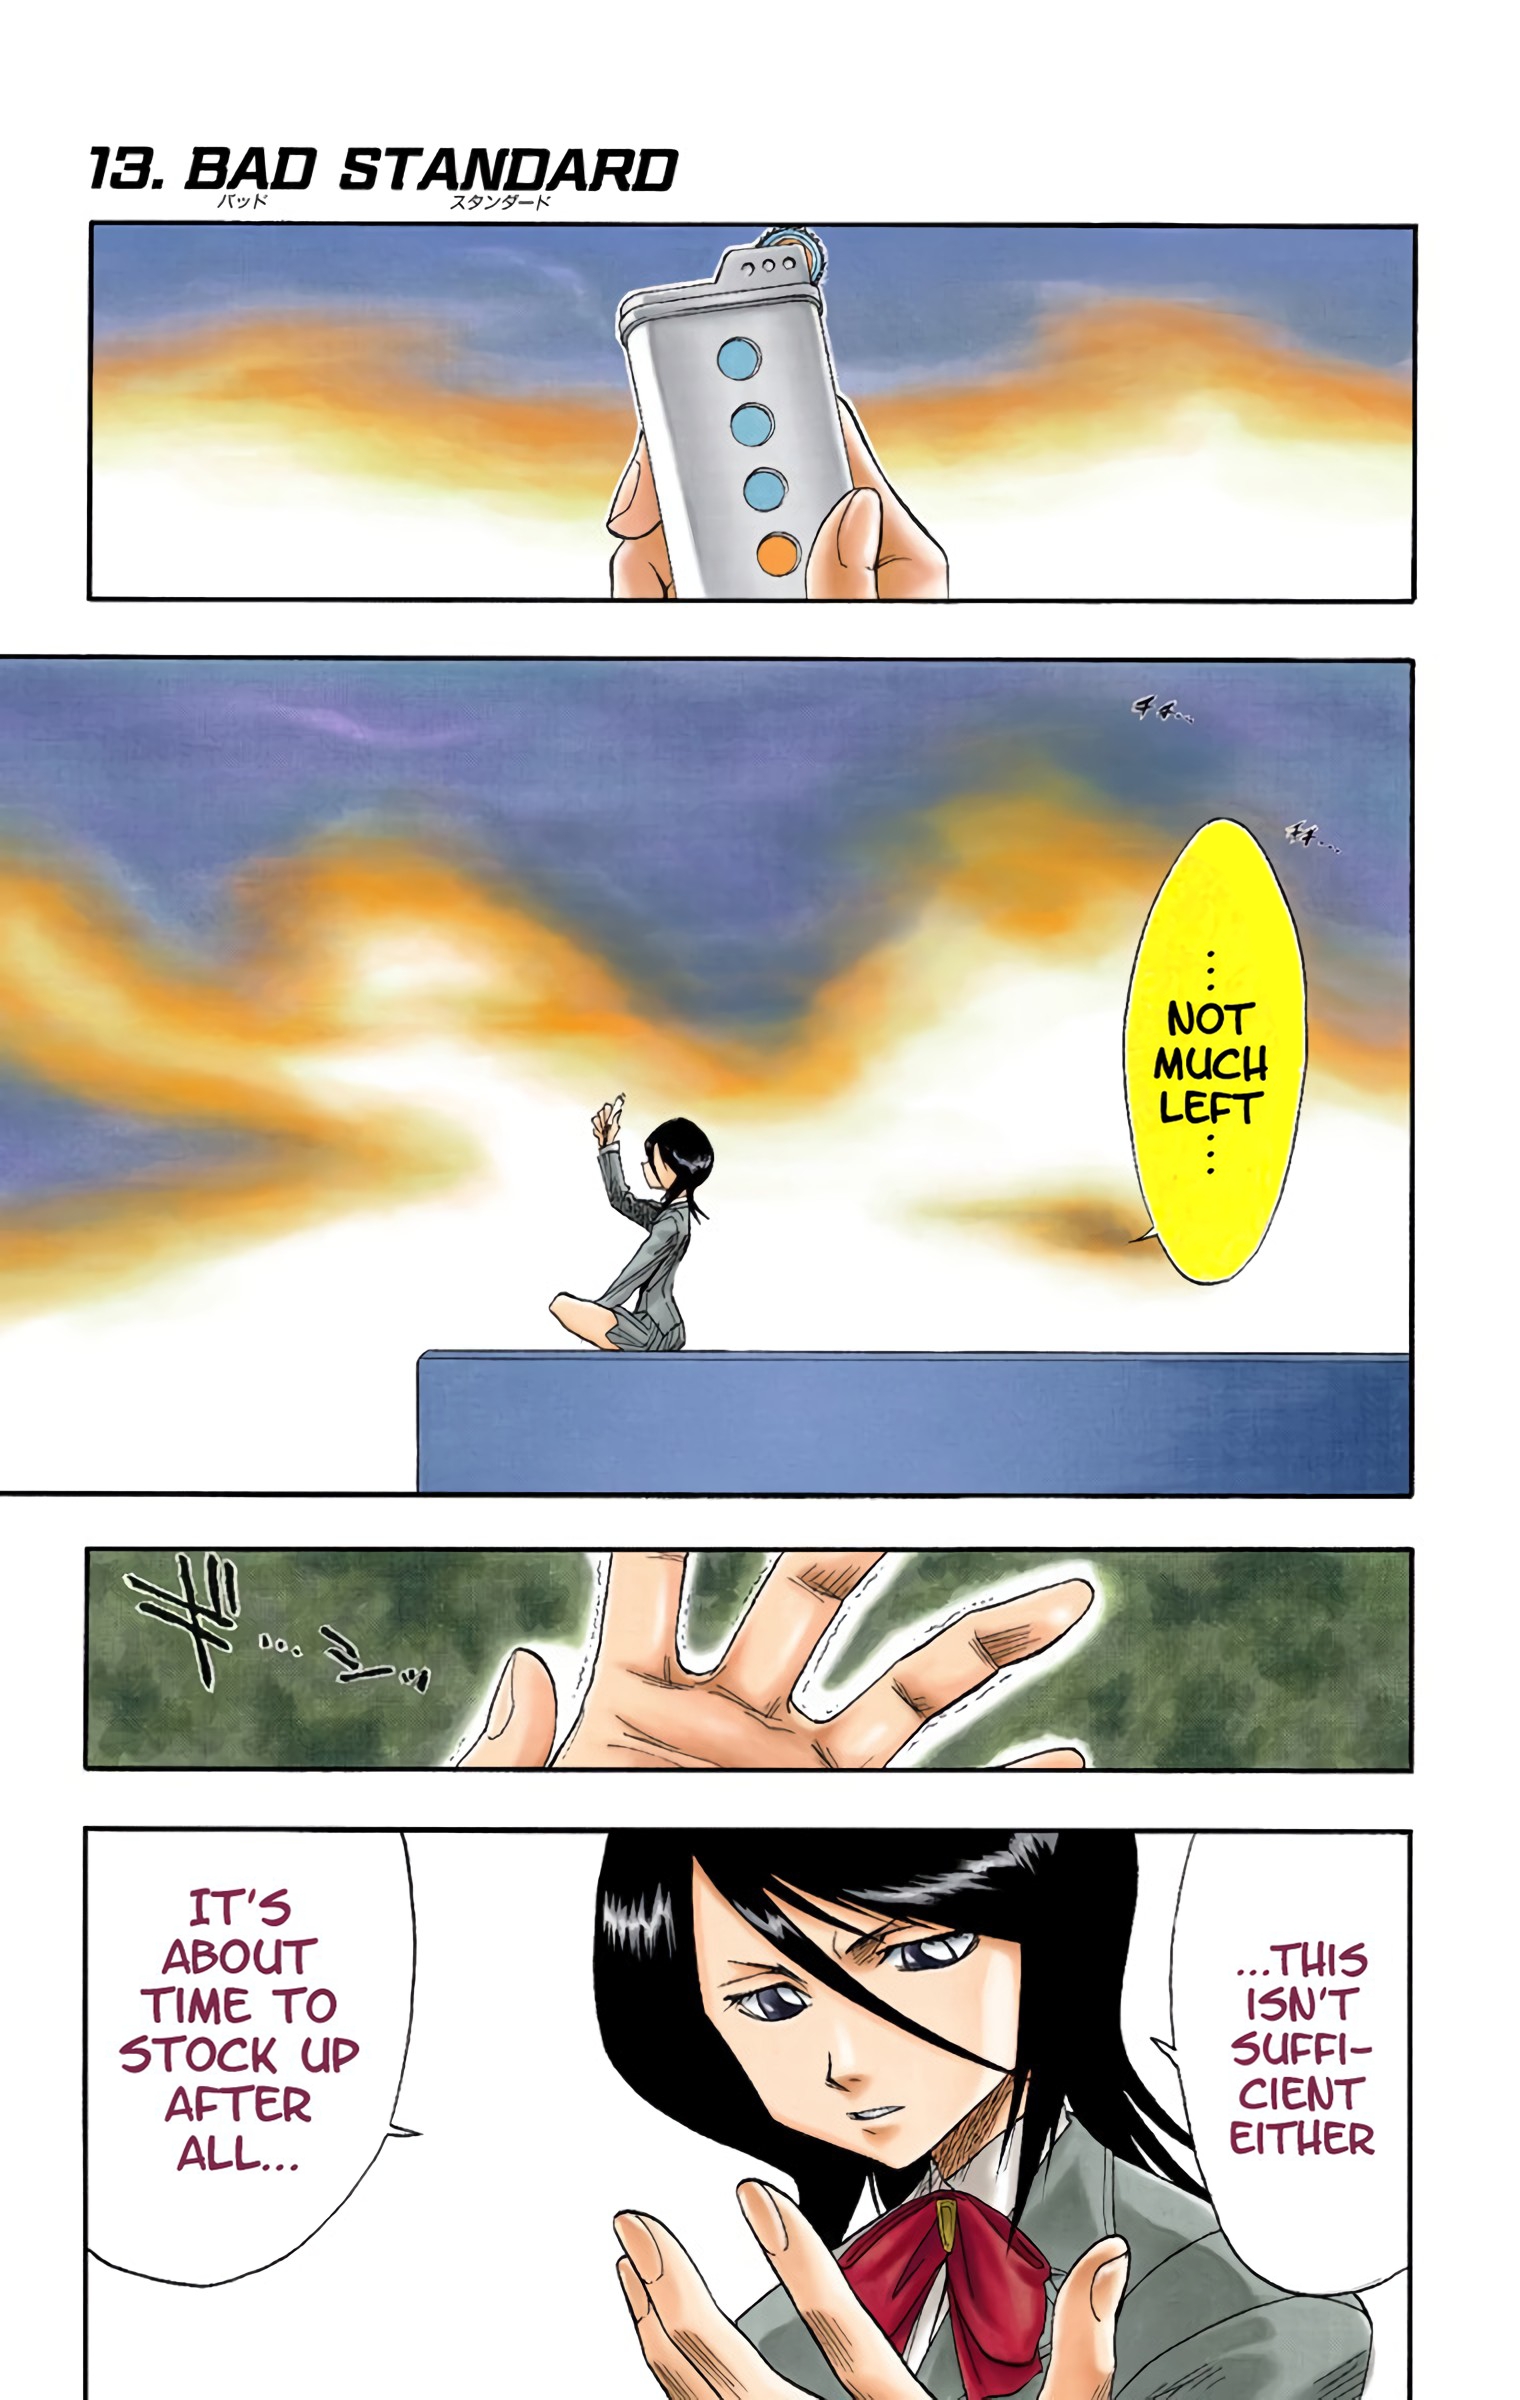 Bleach - Digital Colored Comics Vol.2 Chapter 13: Bad Standard - Picture 1